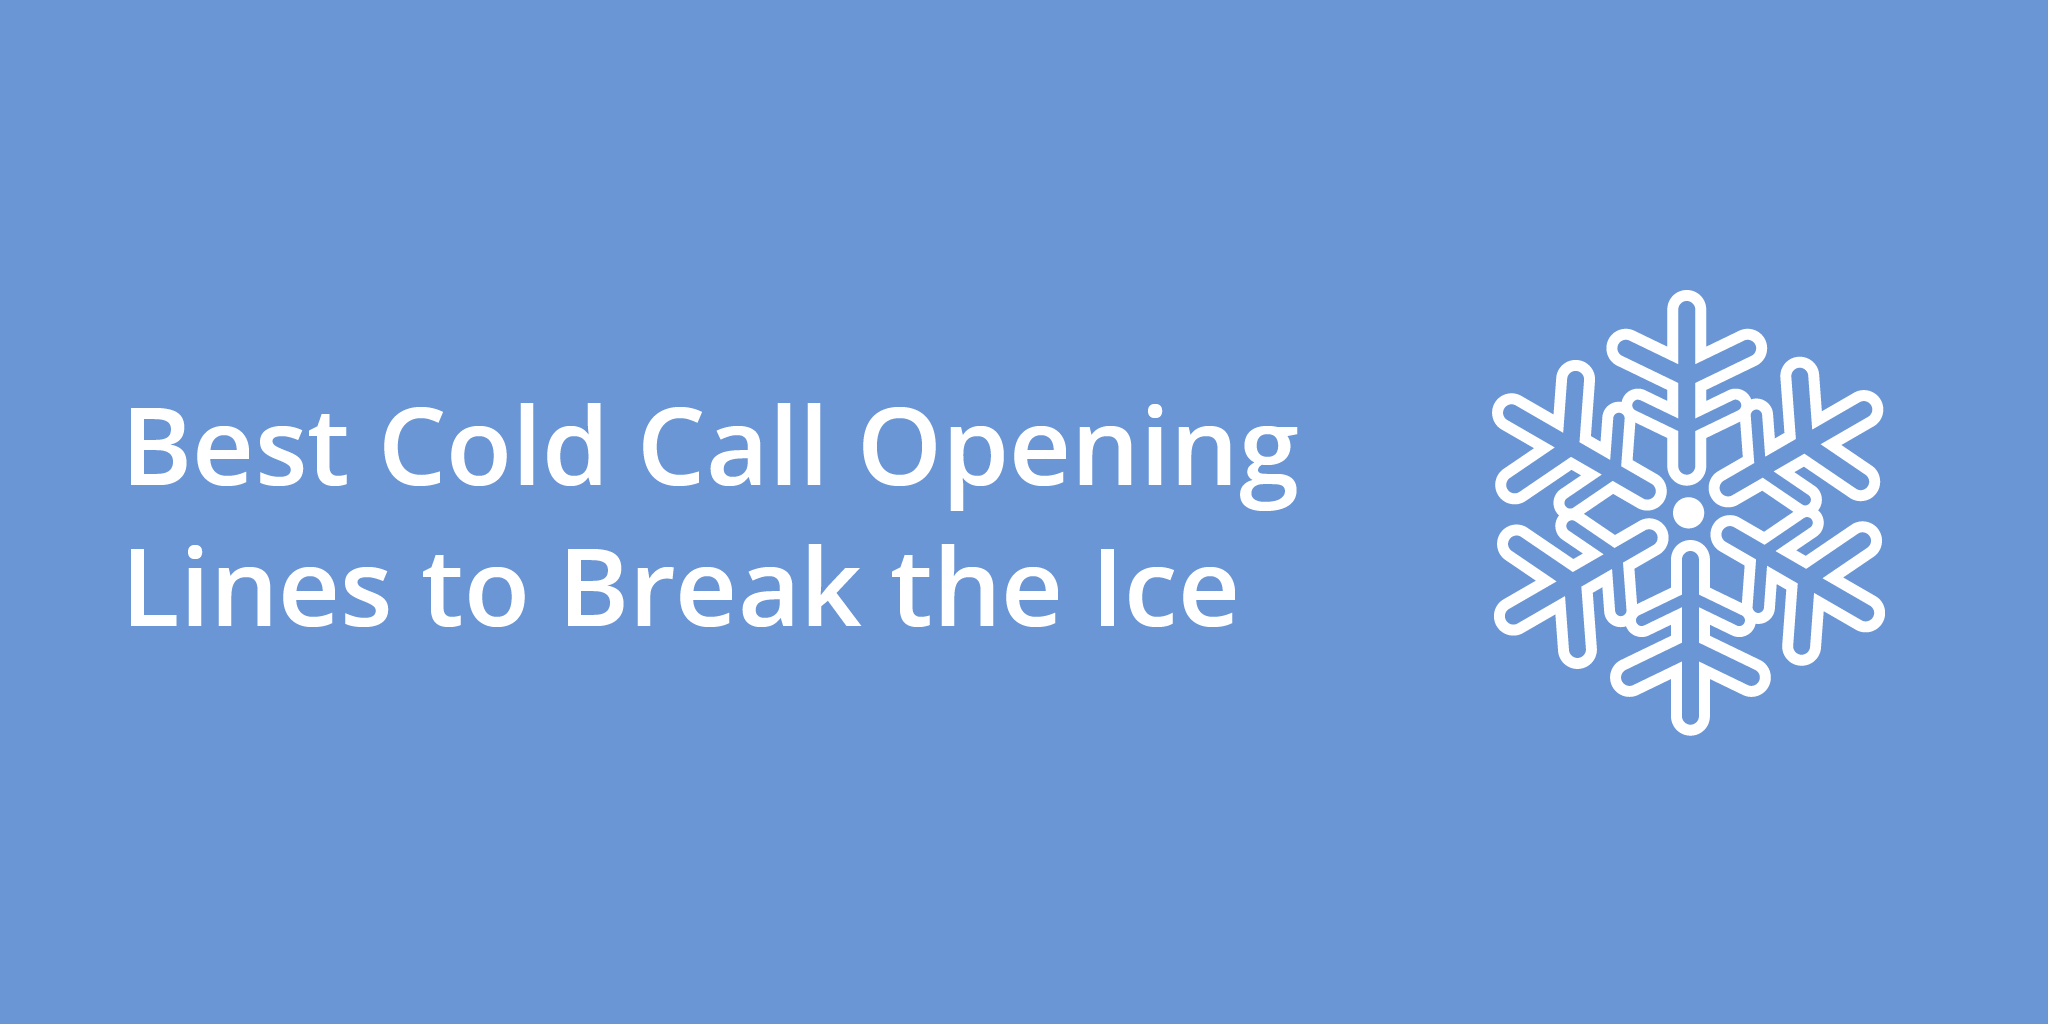 Best Cold Call Opening Lines to Break the Ice | Telephones for business